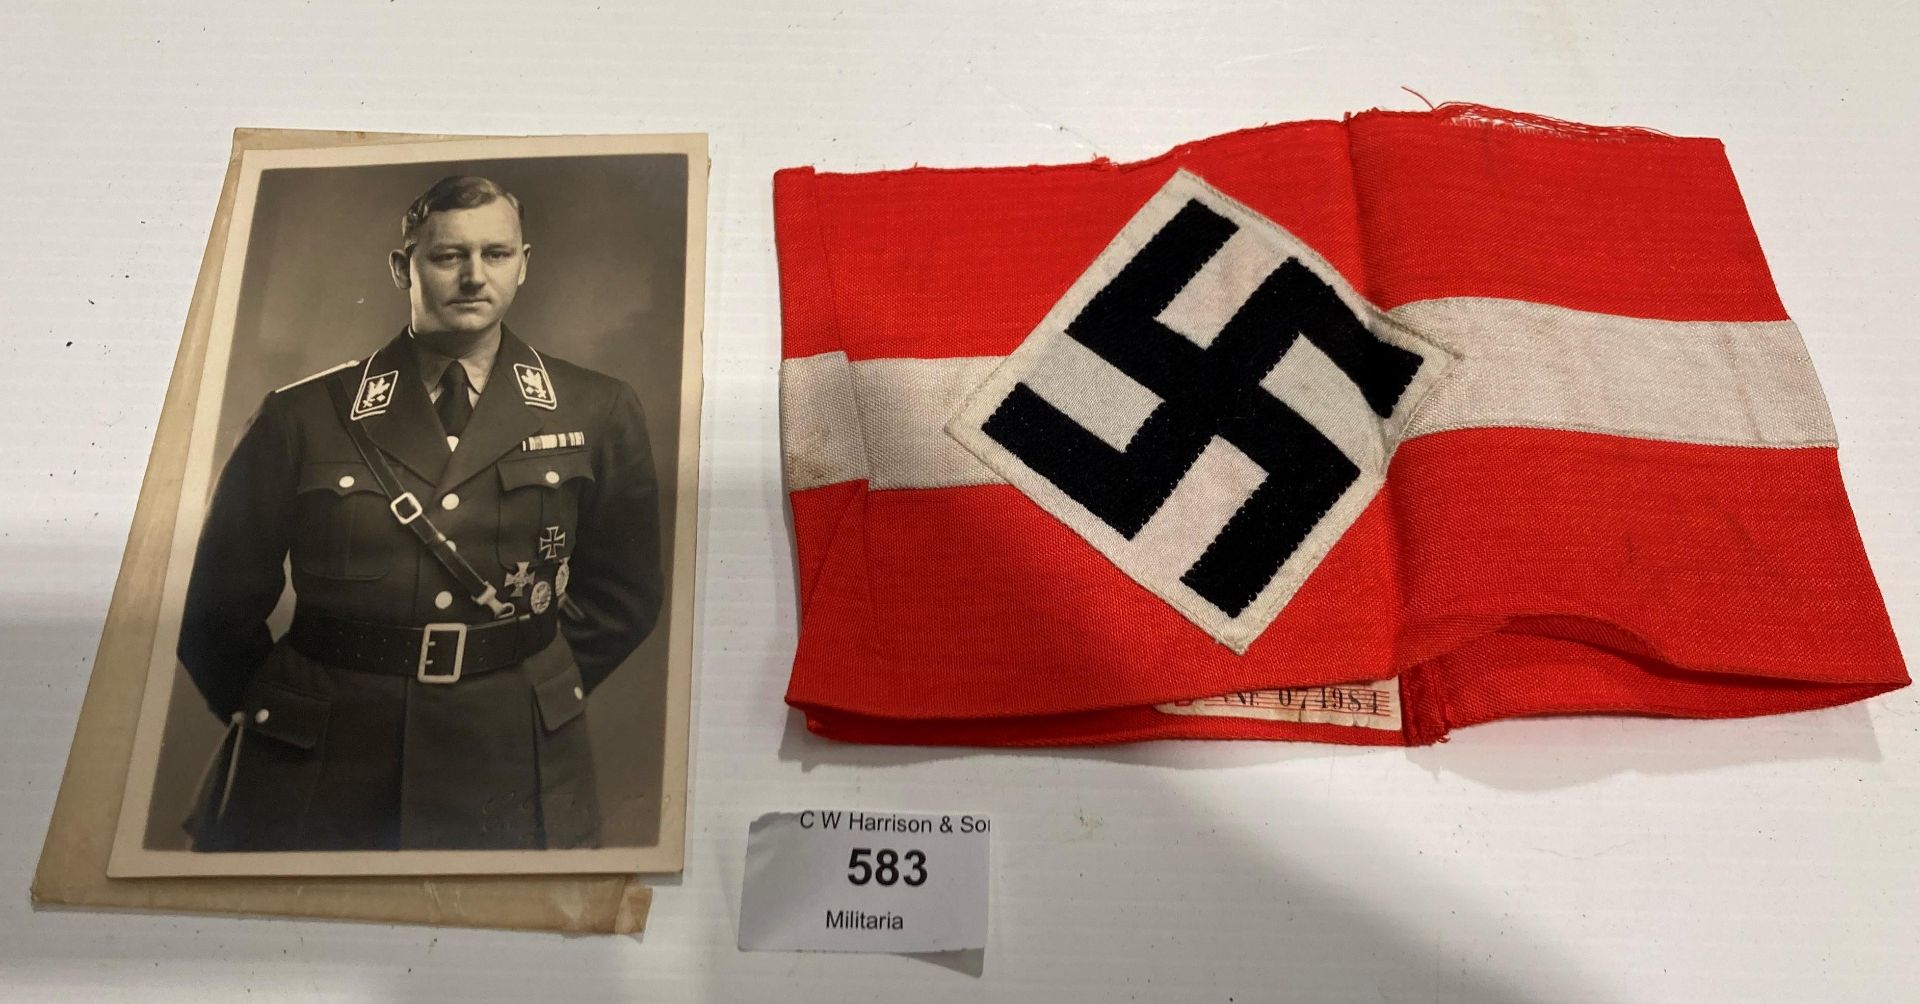 A German Second World War Swastika arm-band and a photograph of a German officer annotated to rear